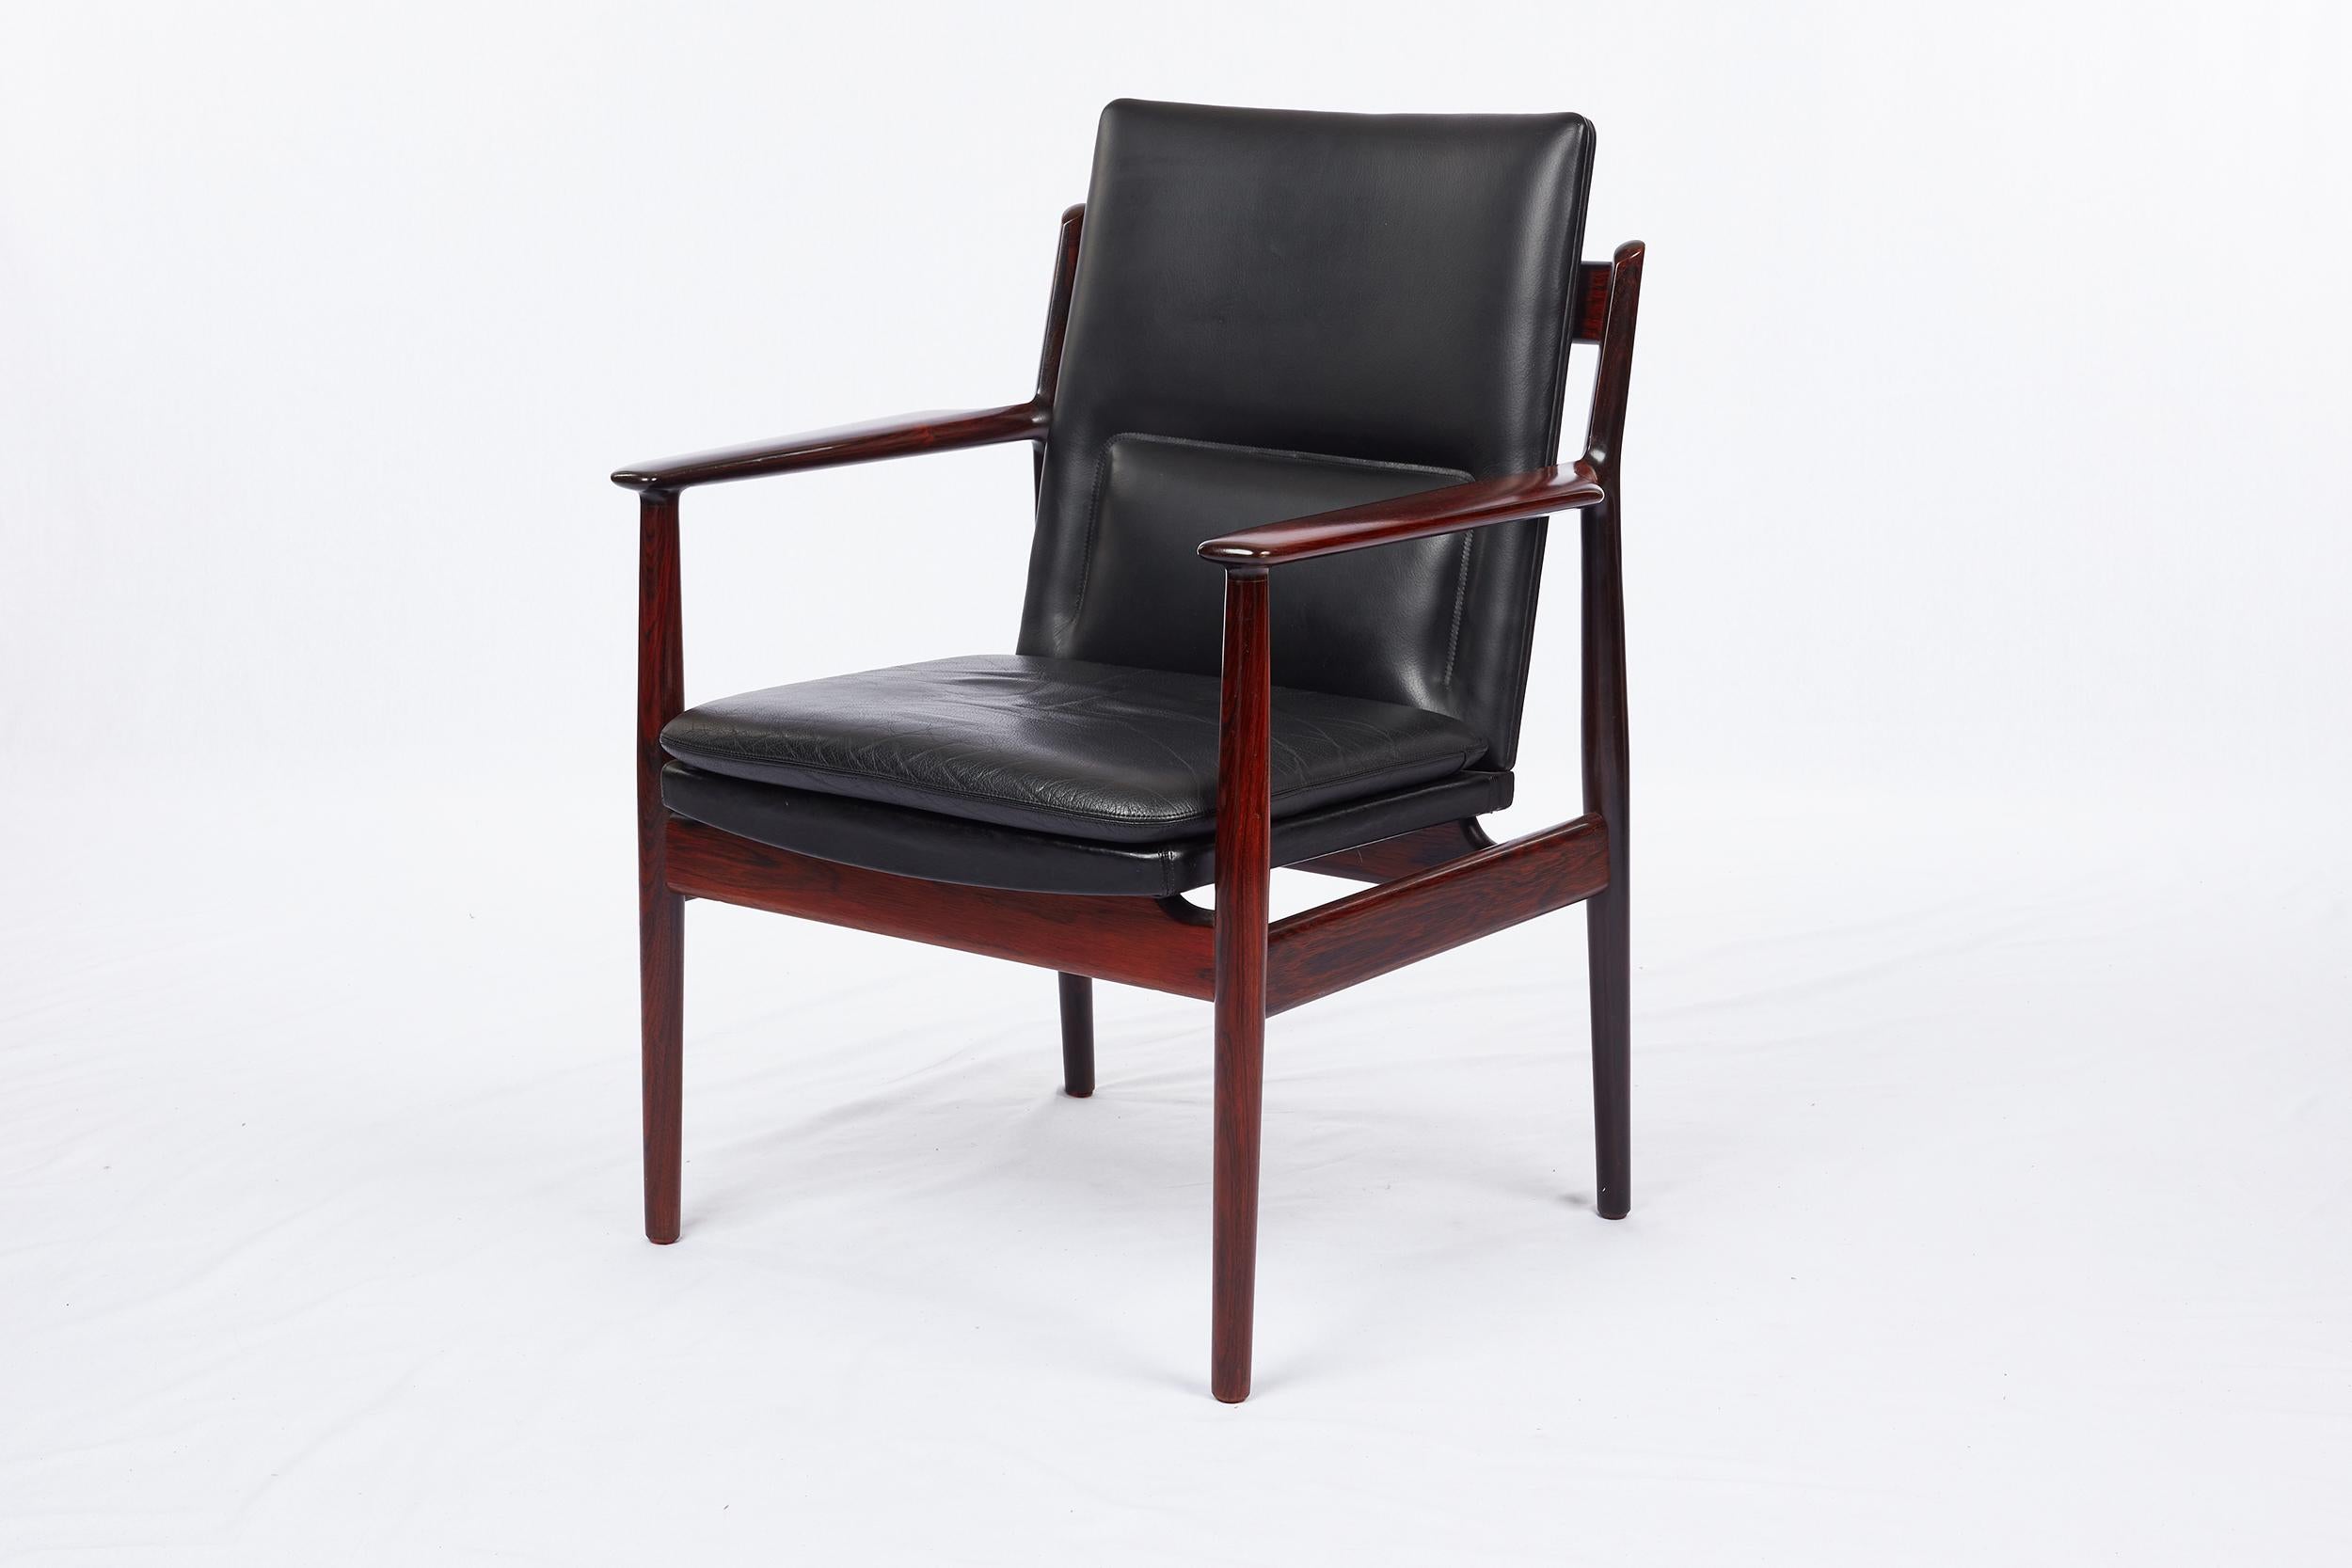 Set of 16 Arne Vodder rosewood armchairs designed in 1968 and produced by Sibast Mobler. Chairs are priced each.